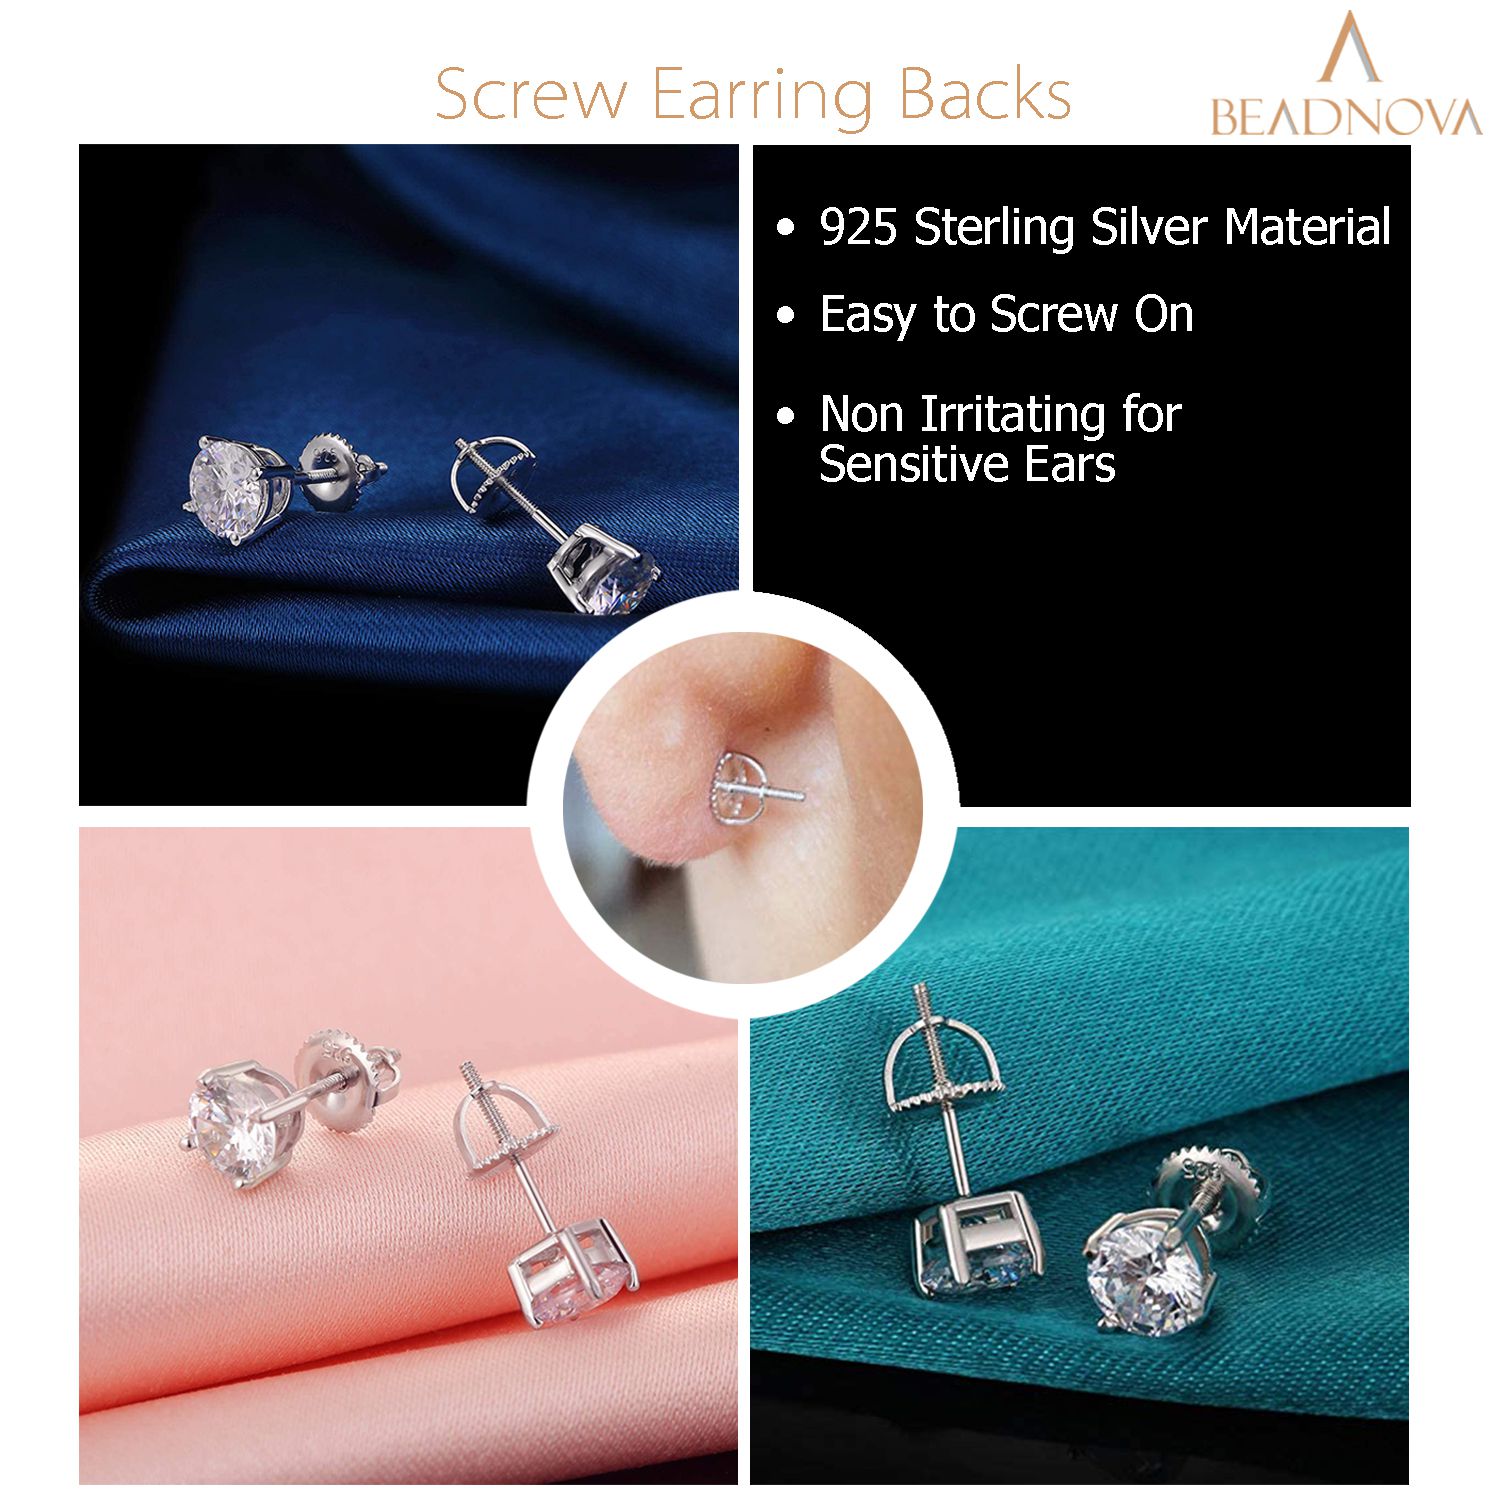 3 Pairs Brass Secure Screw on Earring Backs Replacement for Threaded Post Diamond  Earring Studs Screwbacks Locking Backs  AliExpress